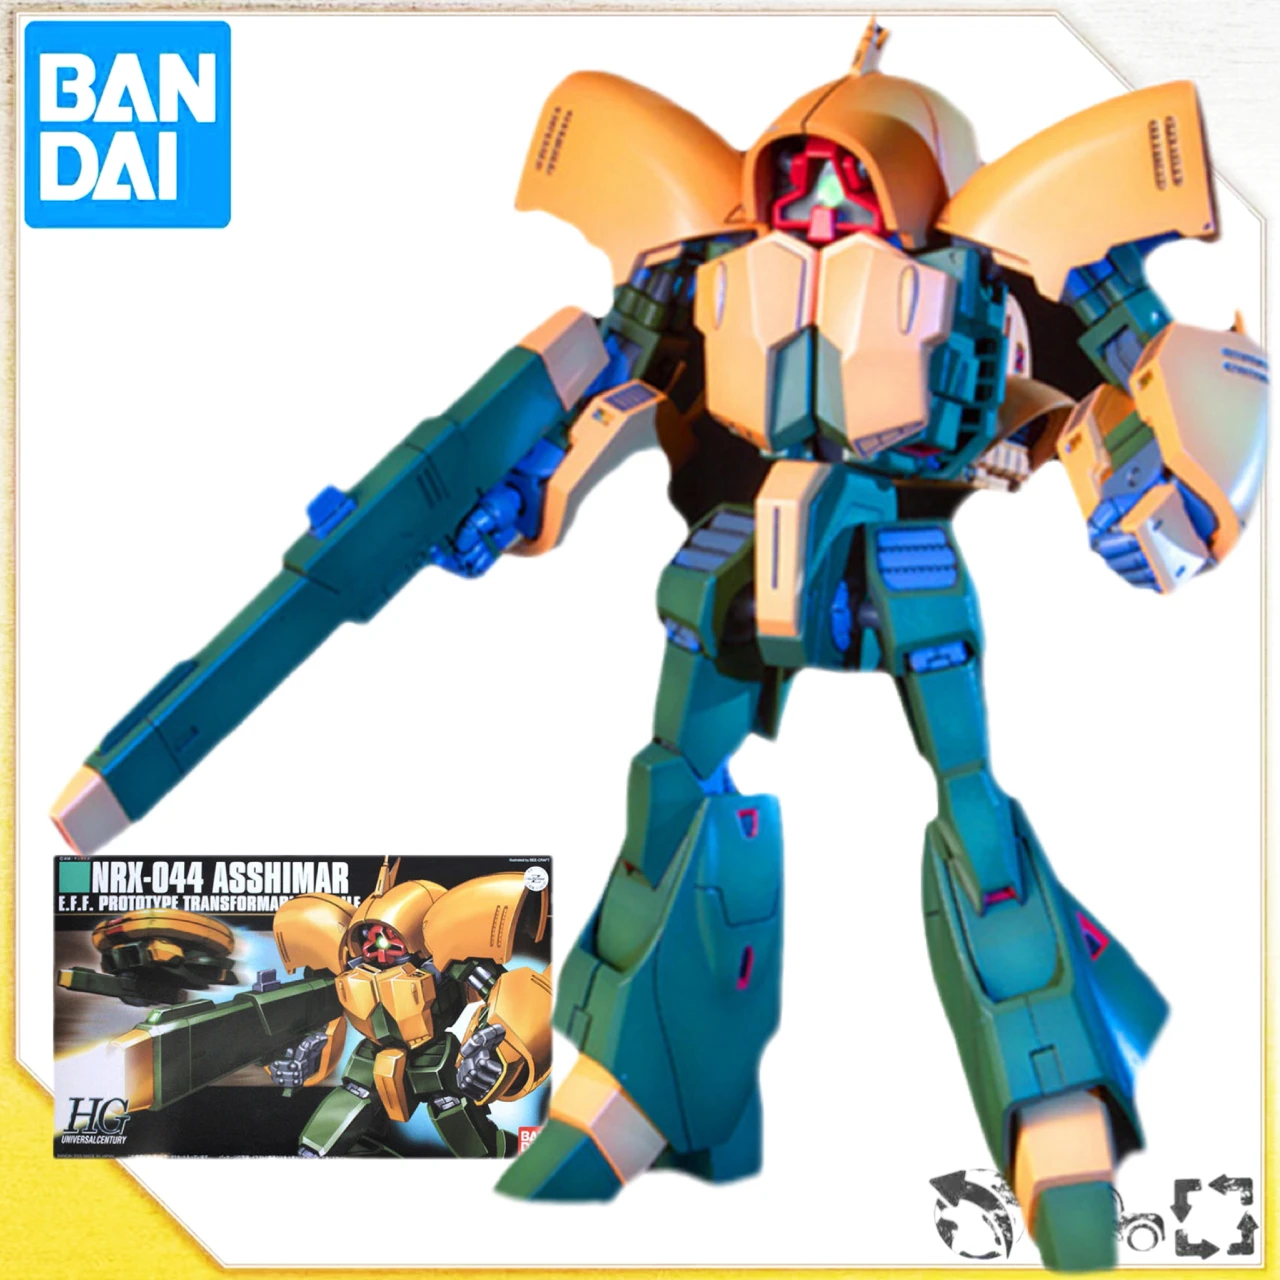 

Spot Direct Delivery Bandai Original Anime Collectible GUNDAM Model HGUC NRX-044 ASSHIMAR Action Figure Kids Toys for Assembly